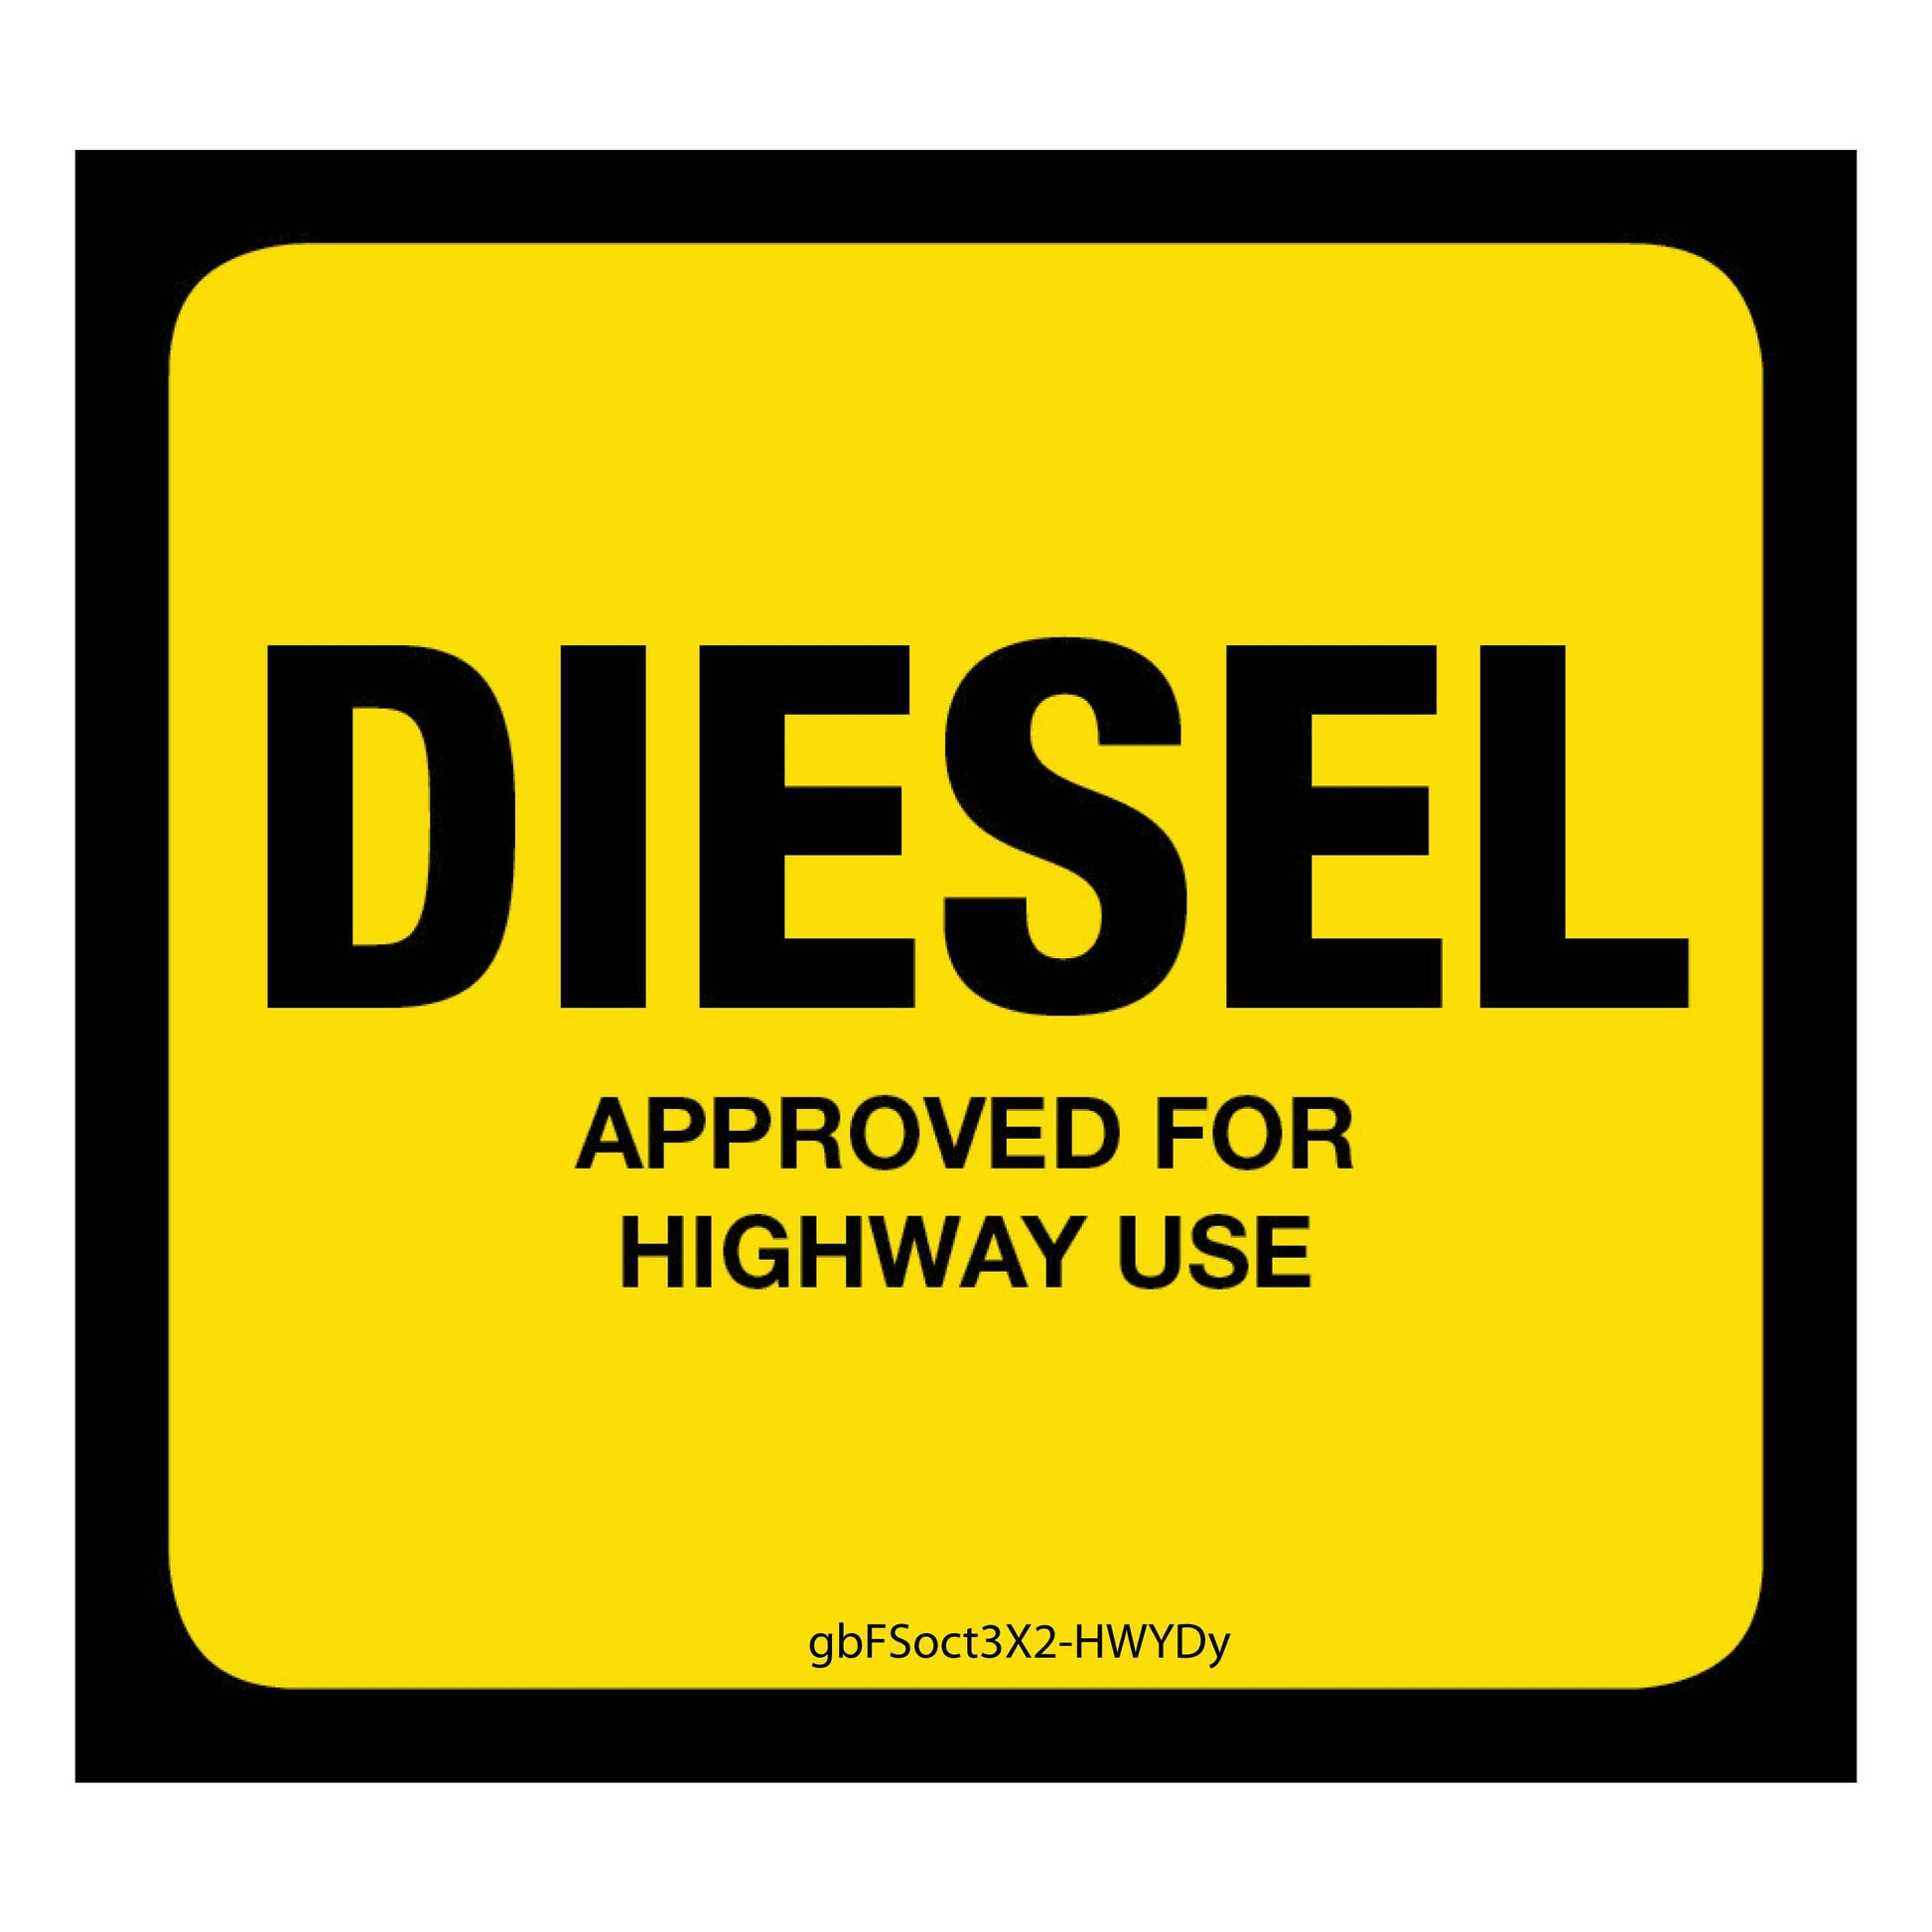 Diesel (On Road) Pump Decal, Yellow. 3 inches by 2.75 inches in size. 